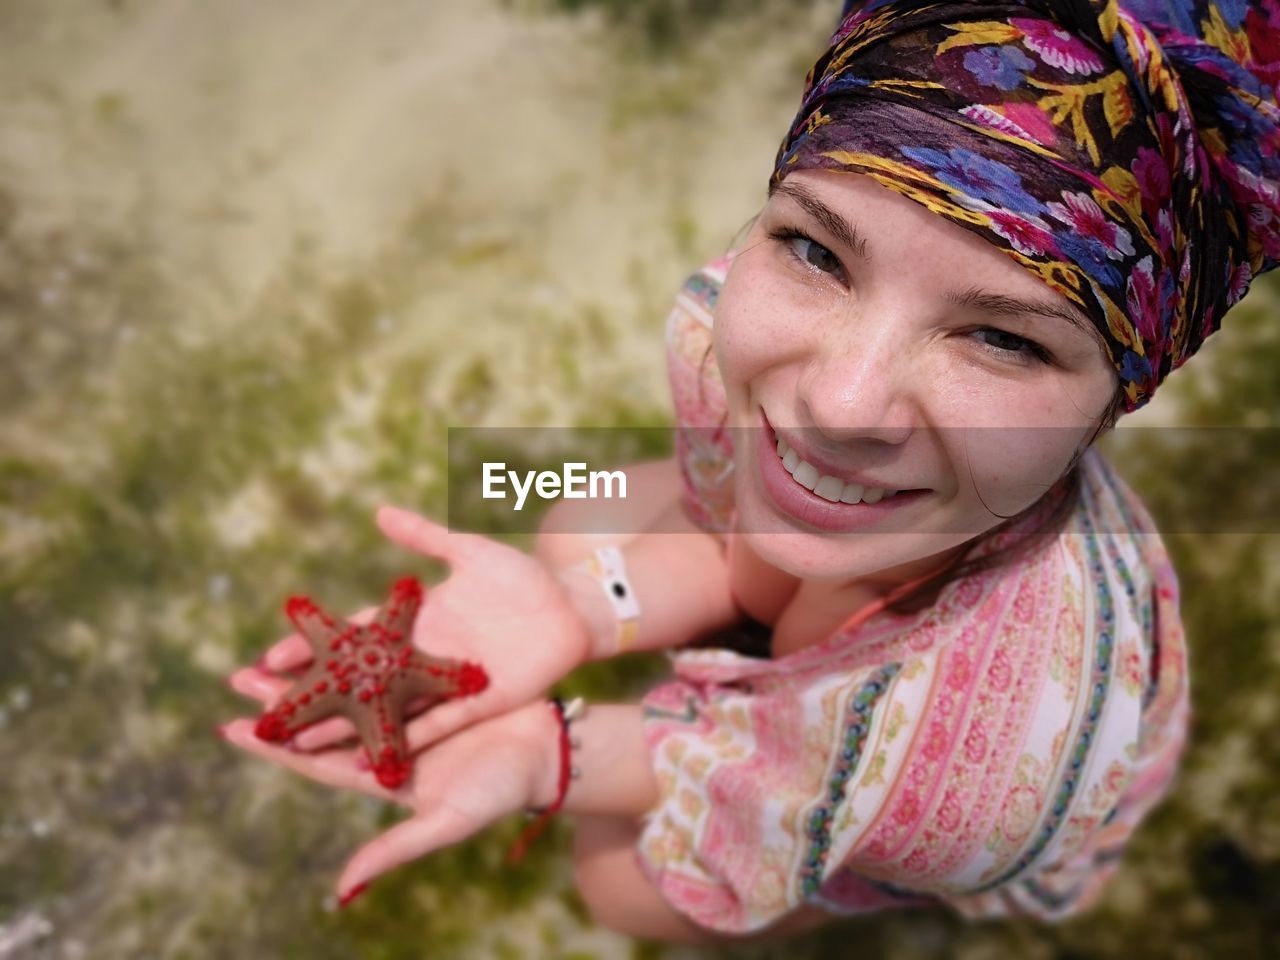 High angle portrait of smiling young woman holding starfish